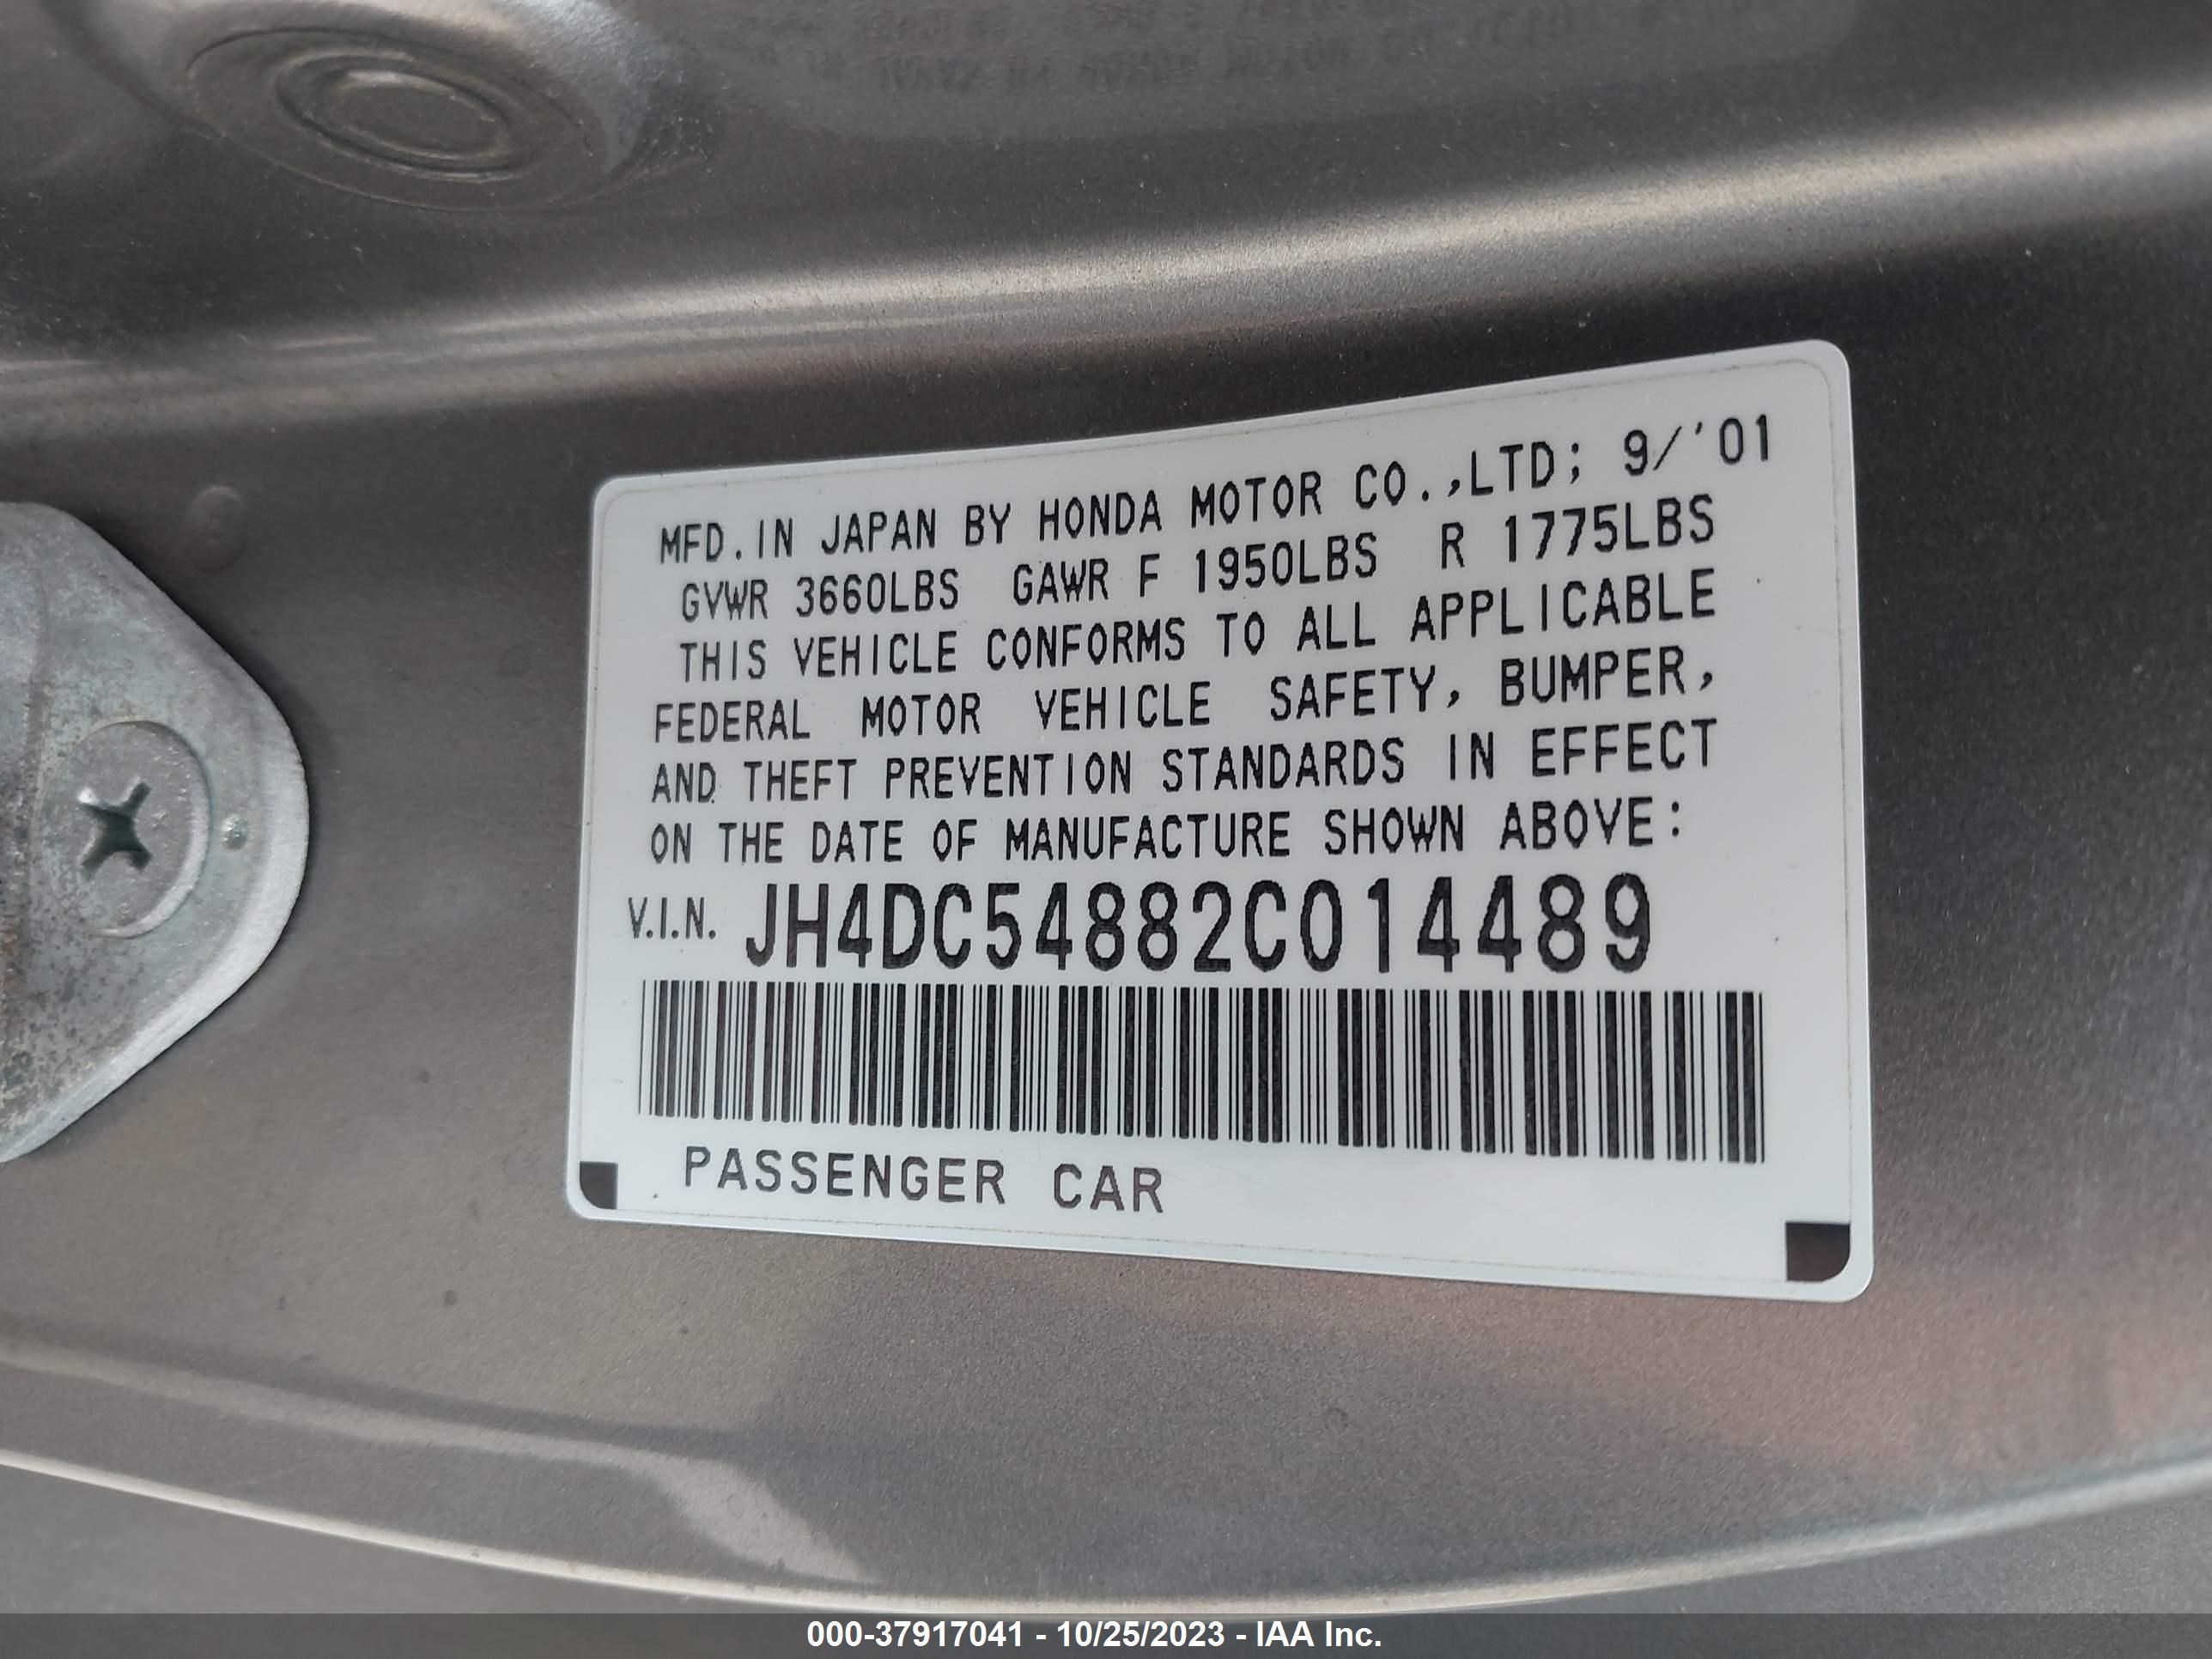 JH4DC54882C014489  - ACURA RSX  2002 IMG - 8